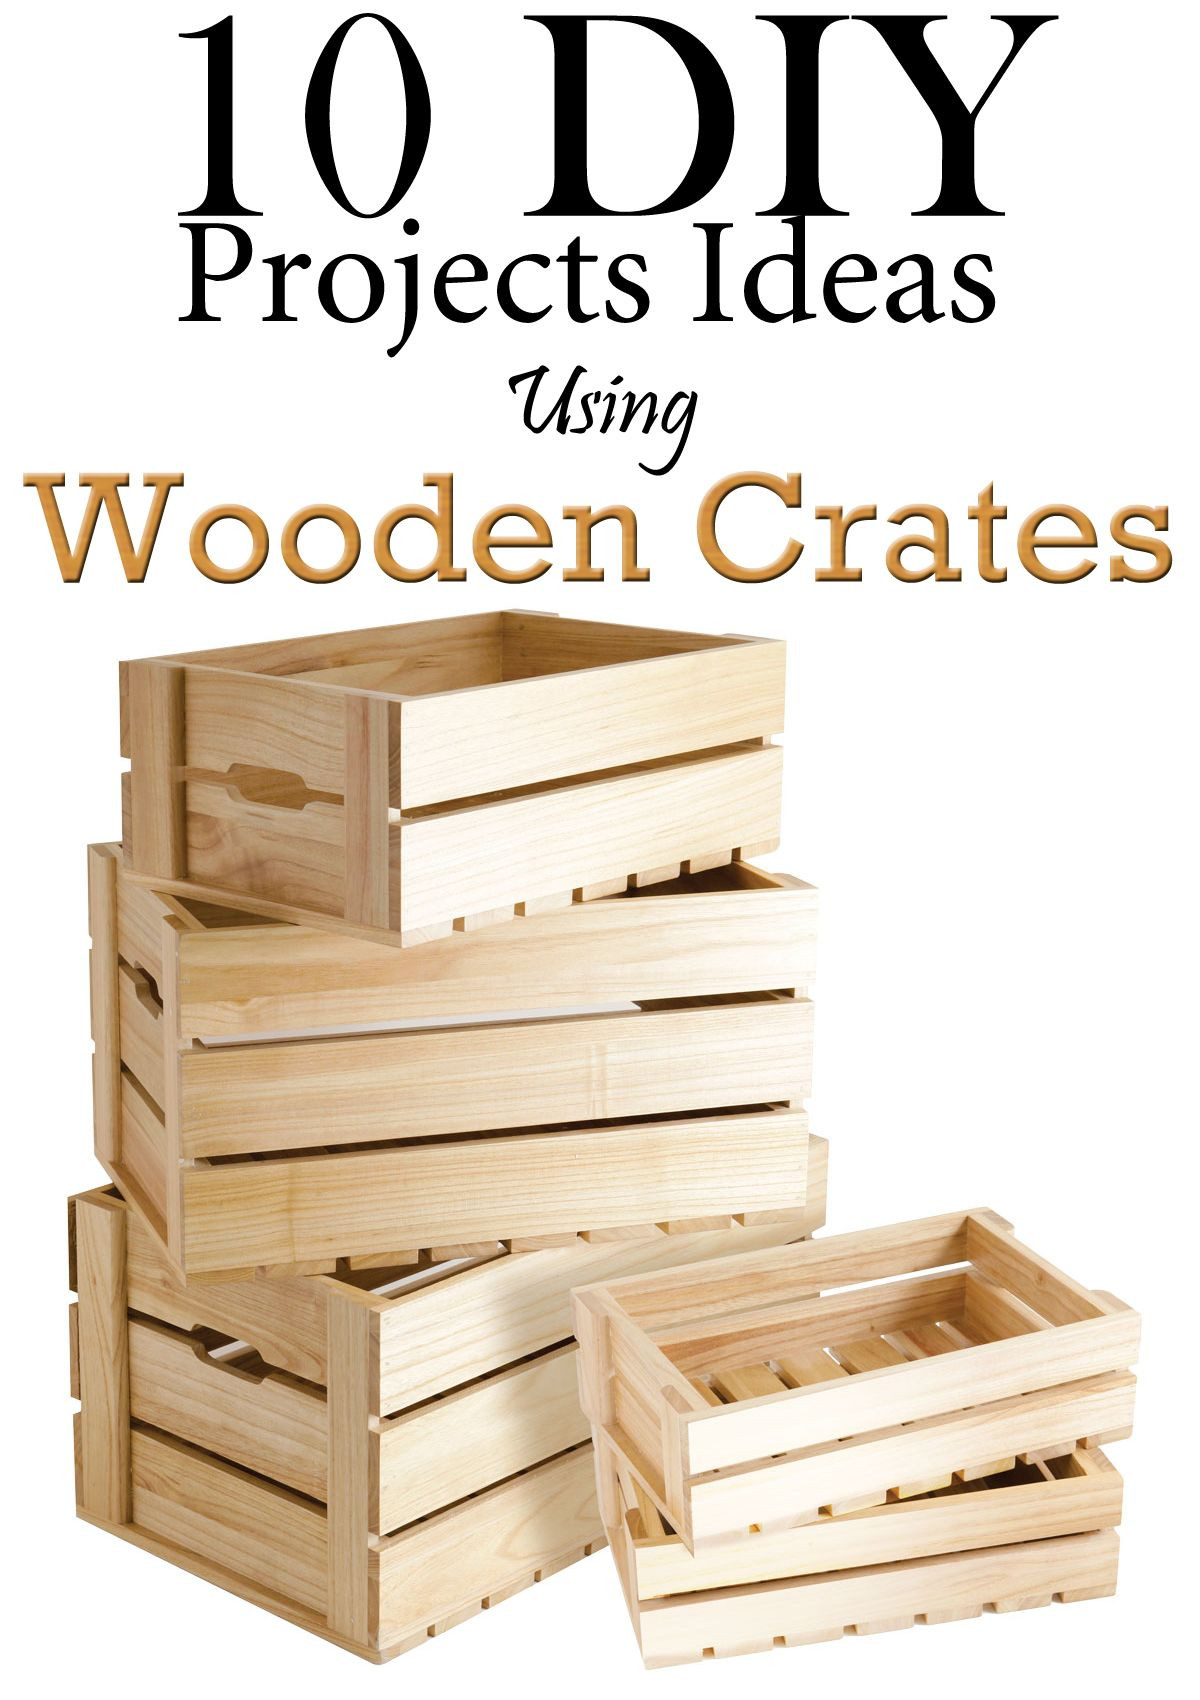 Wooden Crates DIY
 10 DIY Projects Ideas Using Wooden Crates